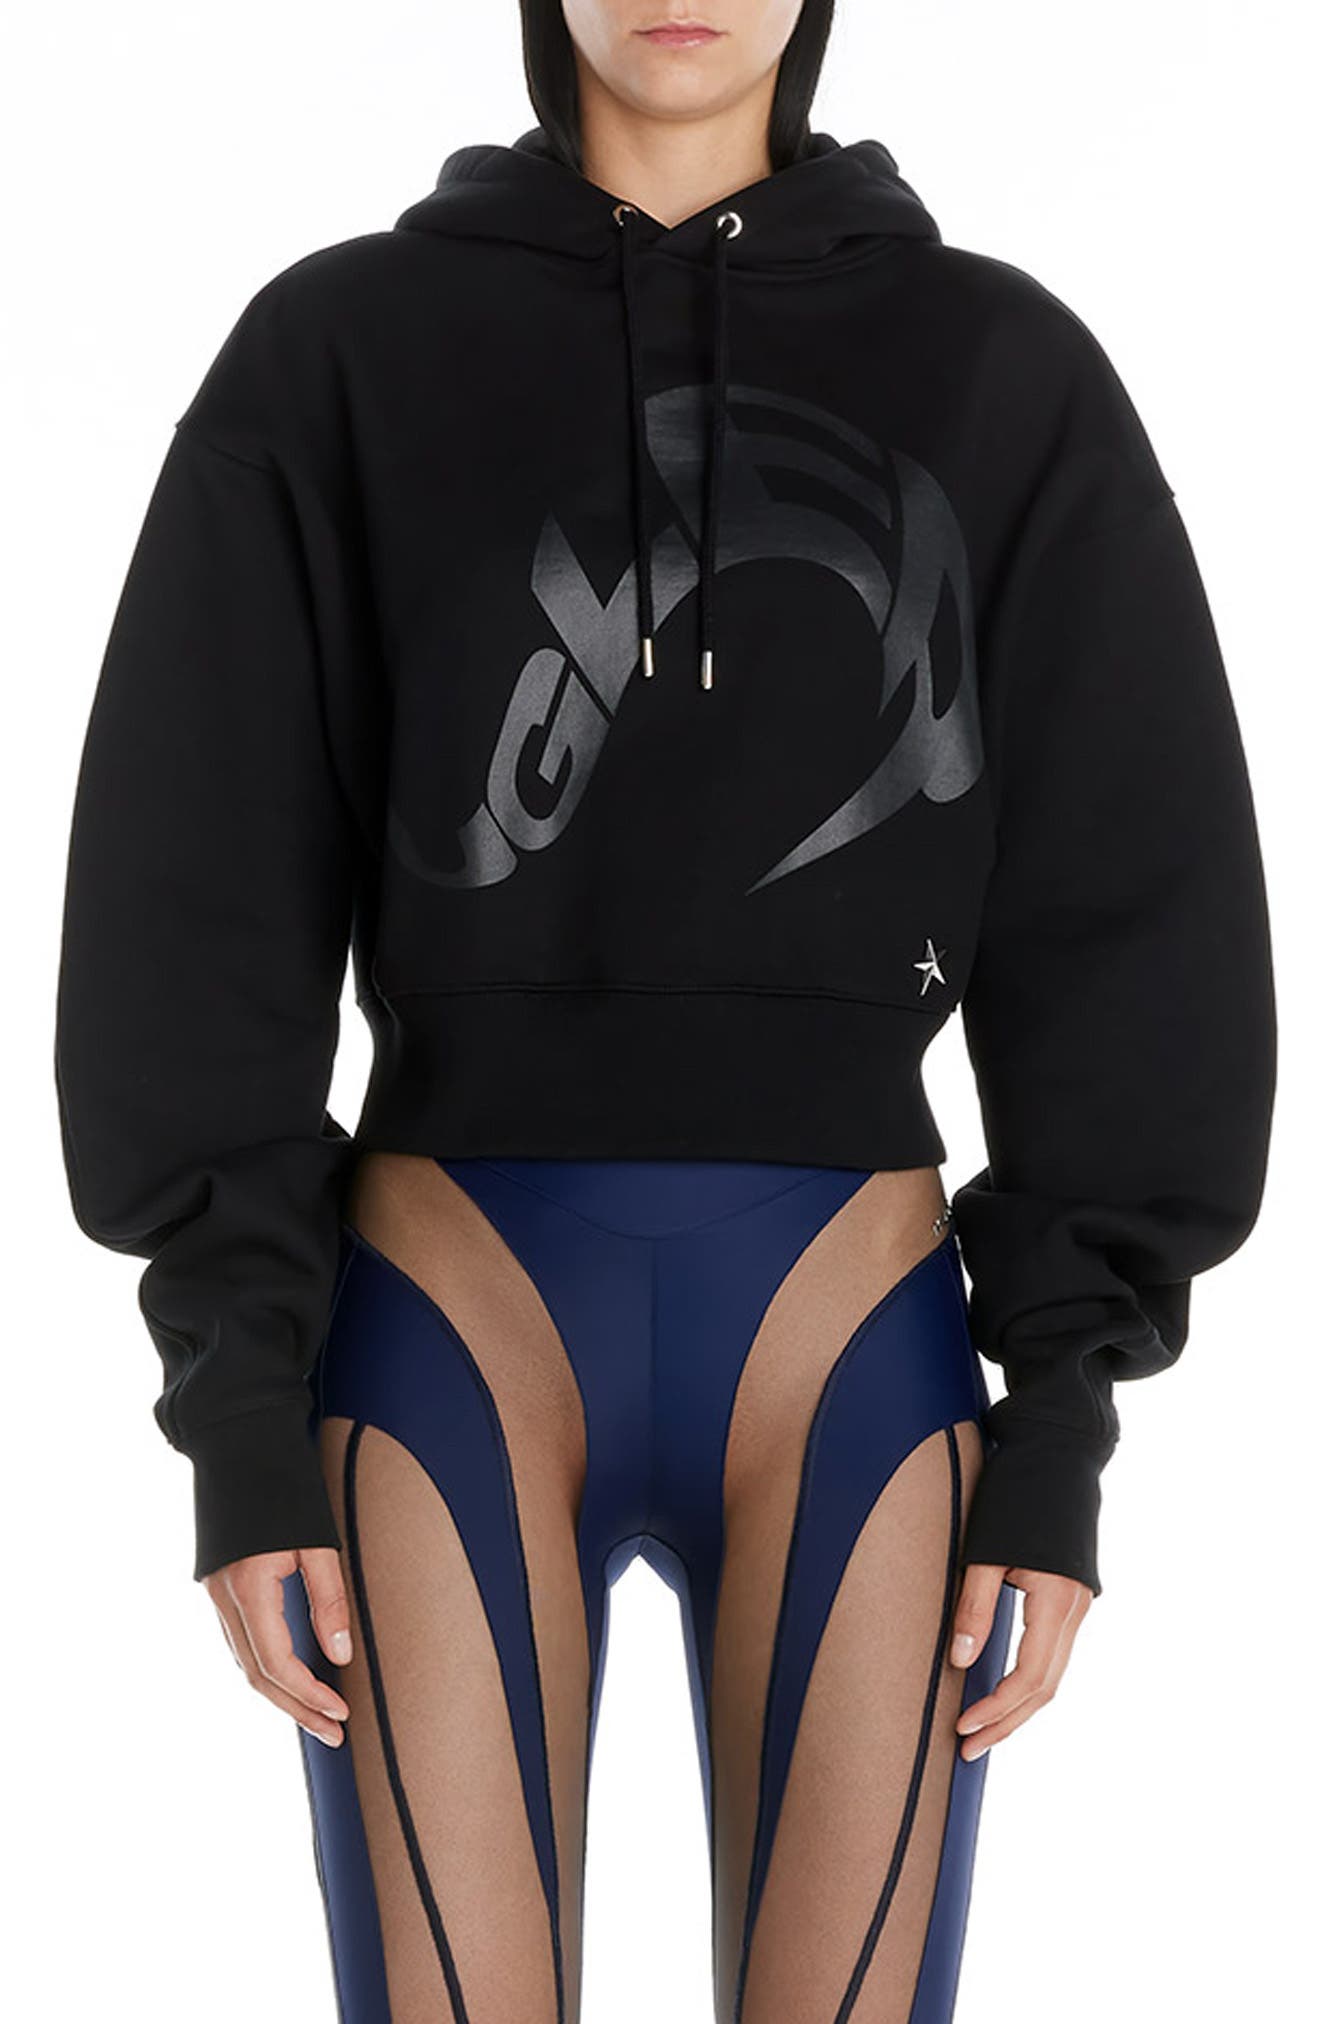 MUGLER Logo Crop Cotton Hoodie in Black at Nordstrom, Size Small